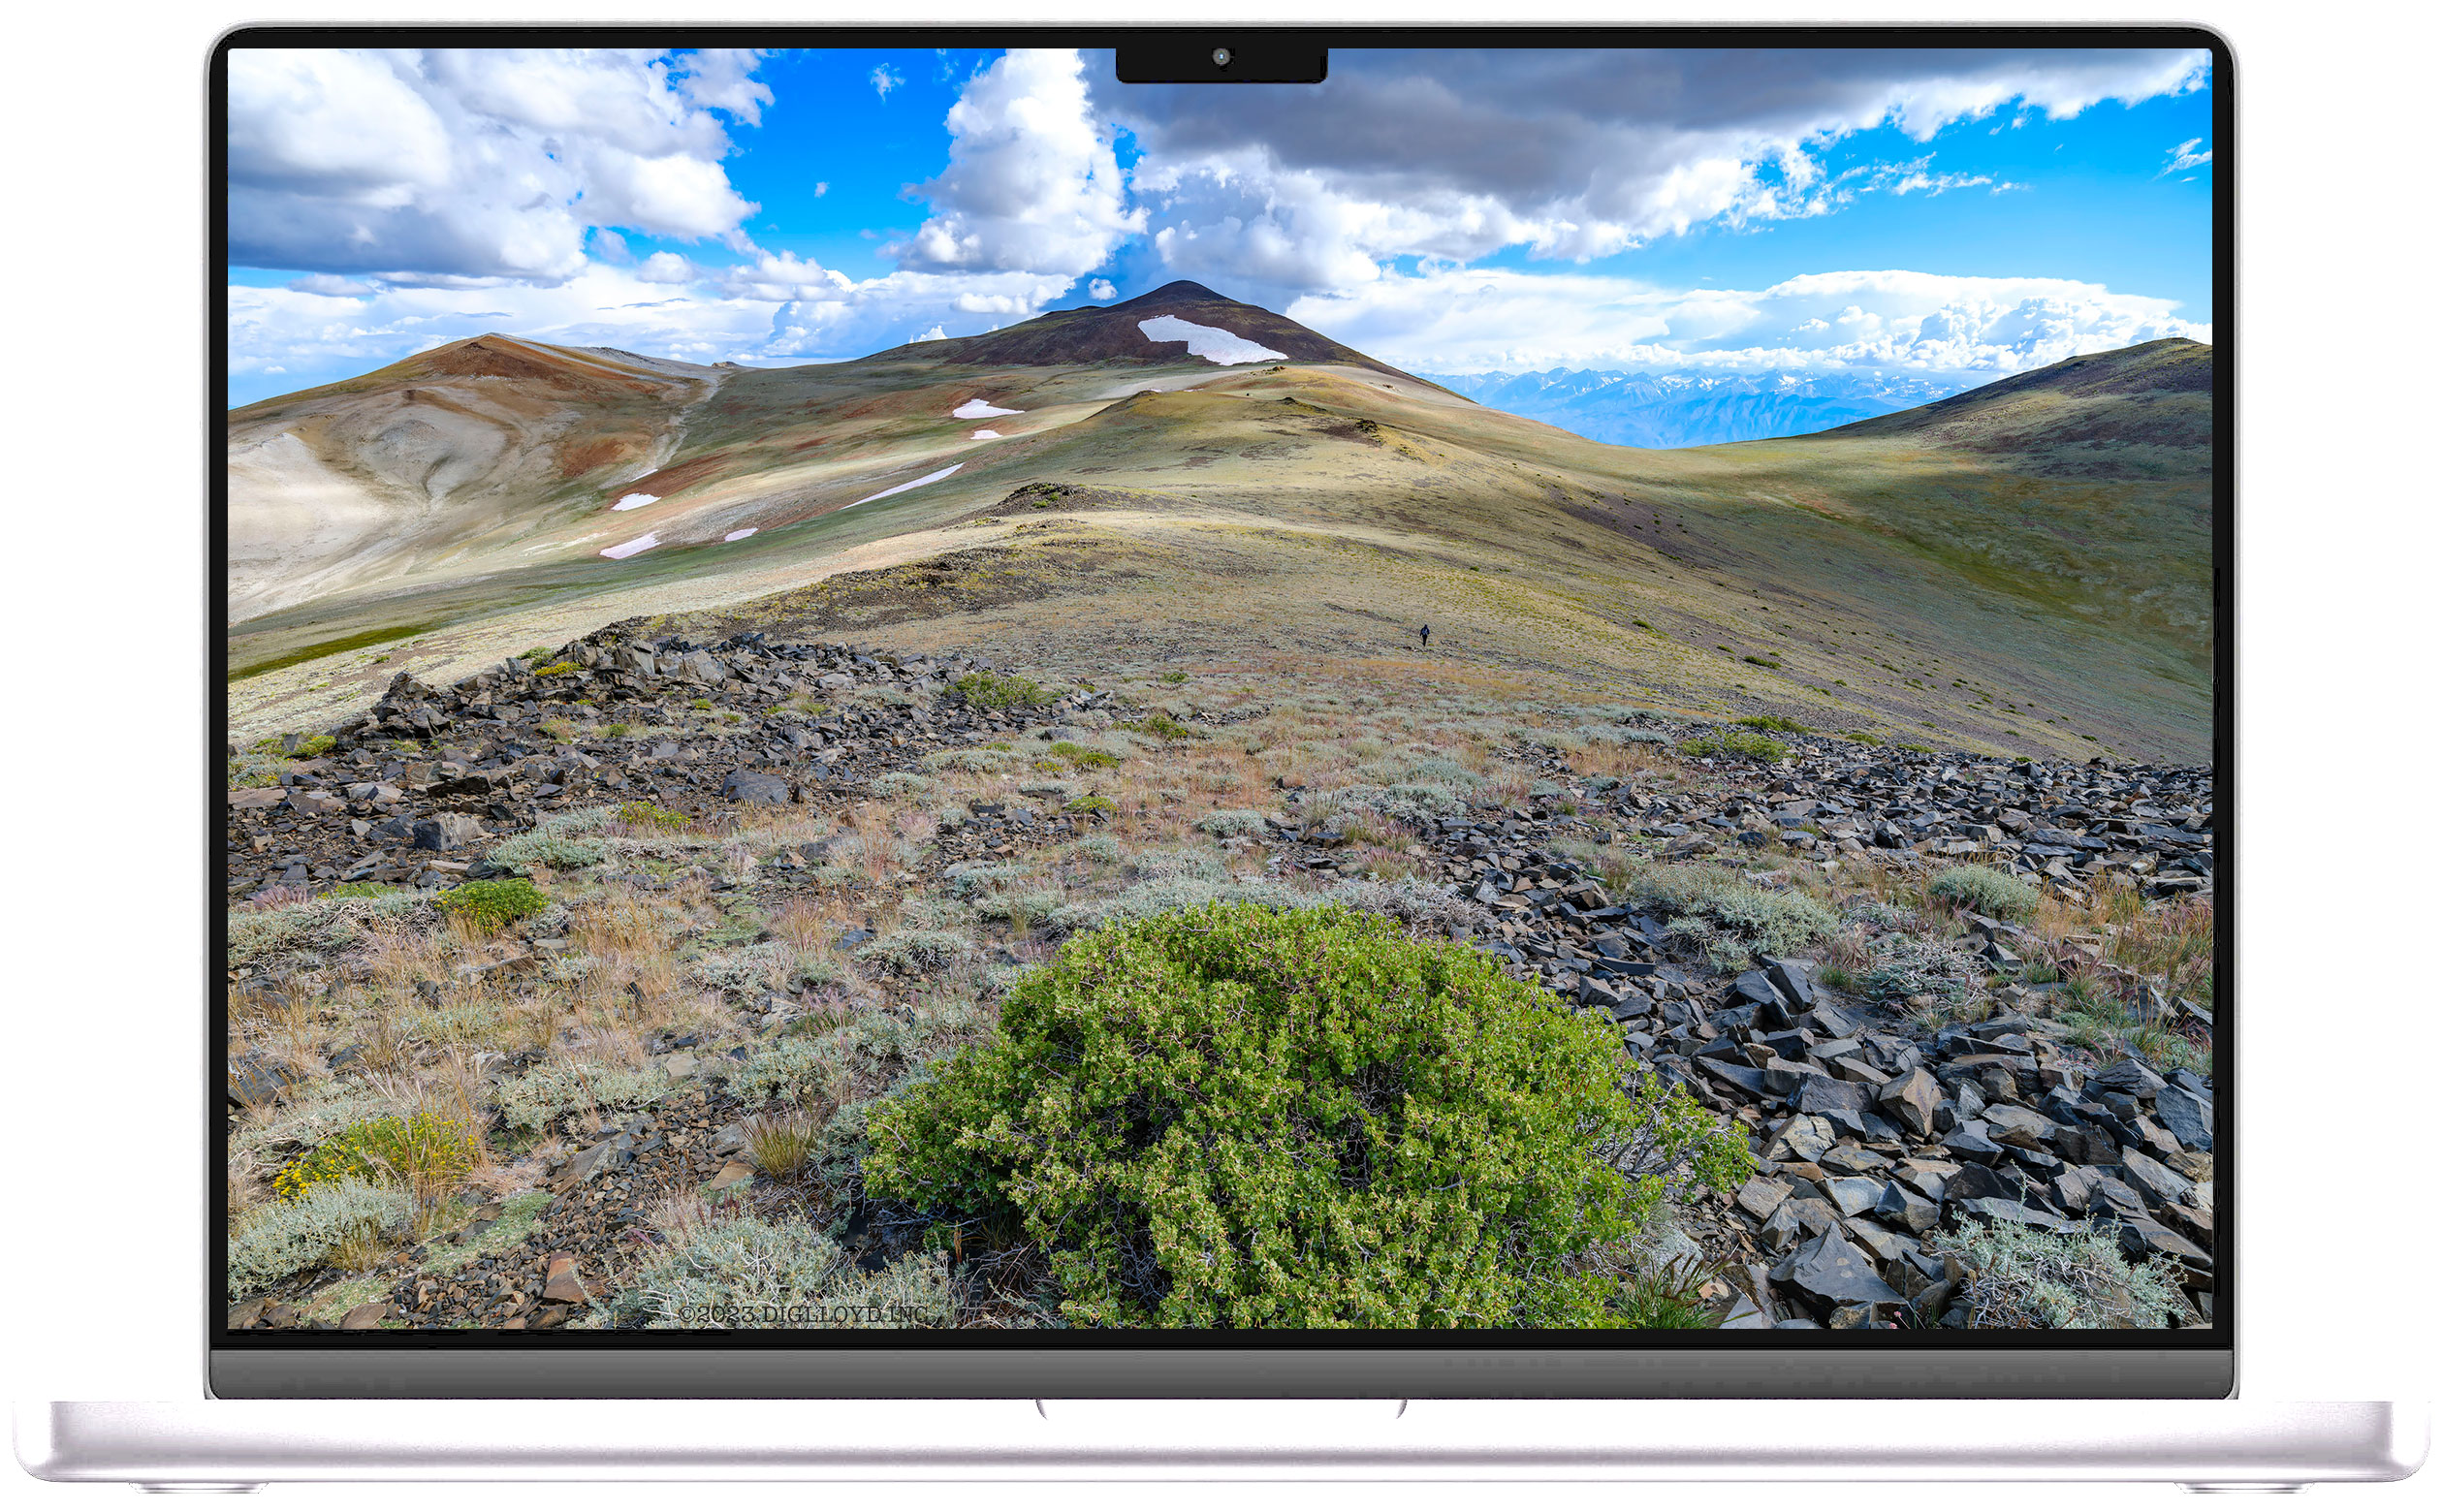 Hiker high in the White Mountains on MBP display